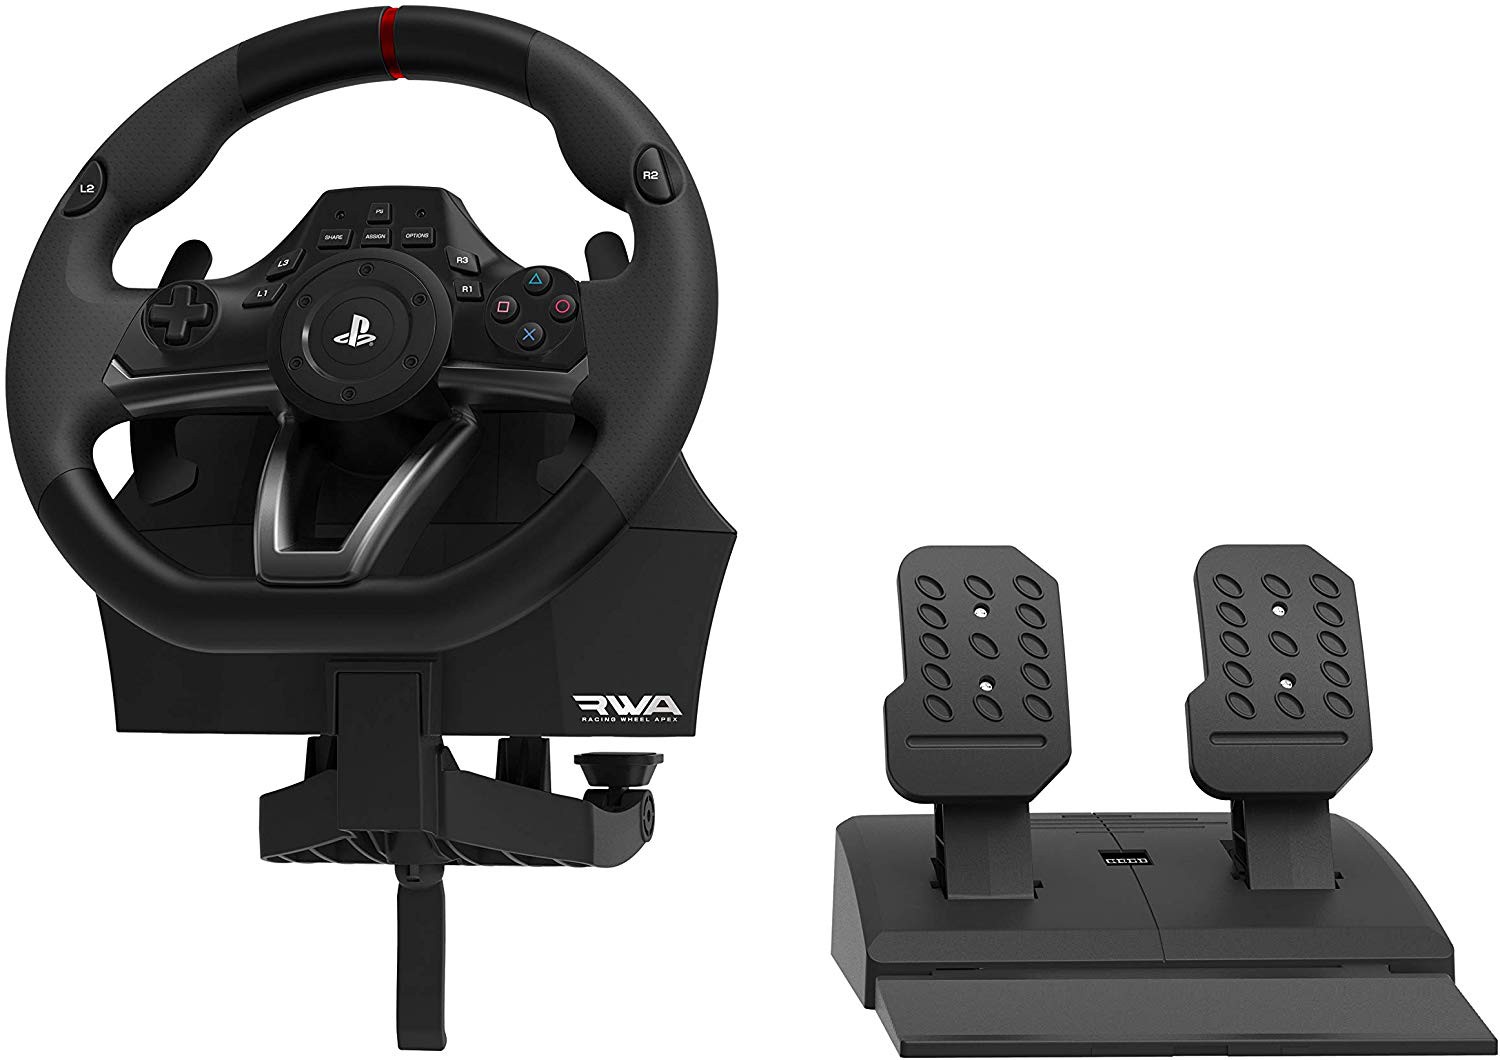 HORI  RWA Racing Wheel Apex controller Licensed by Sony | PS3/PS4/PC